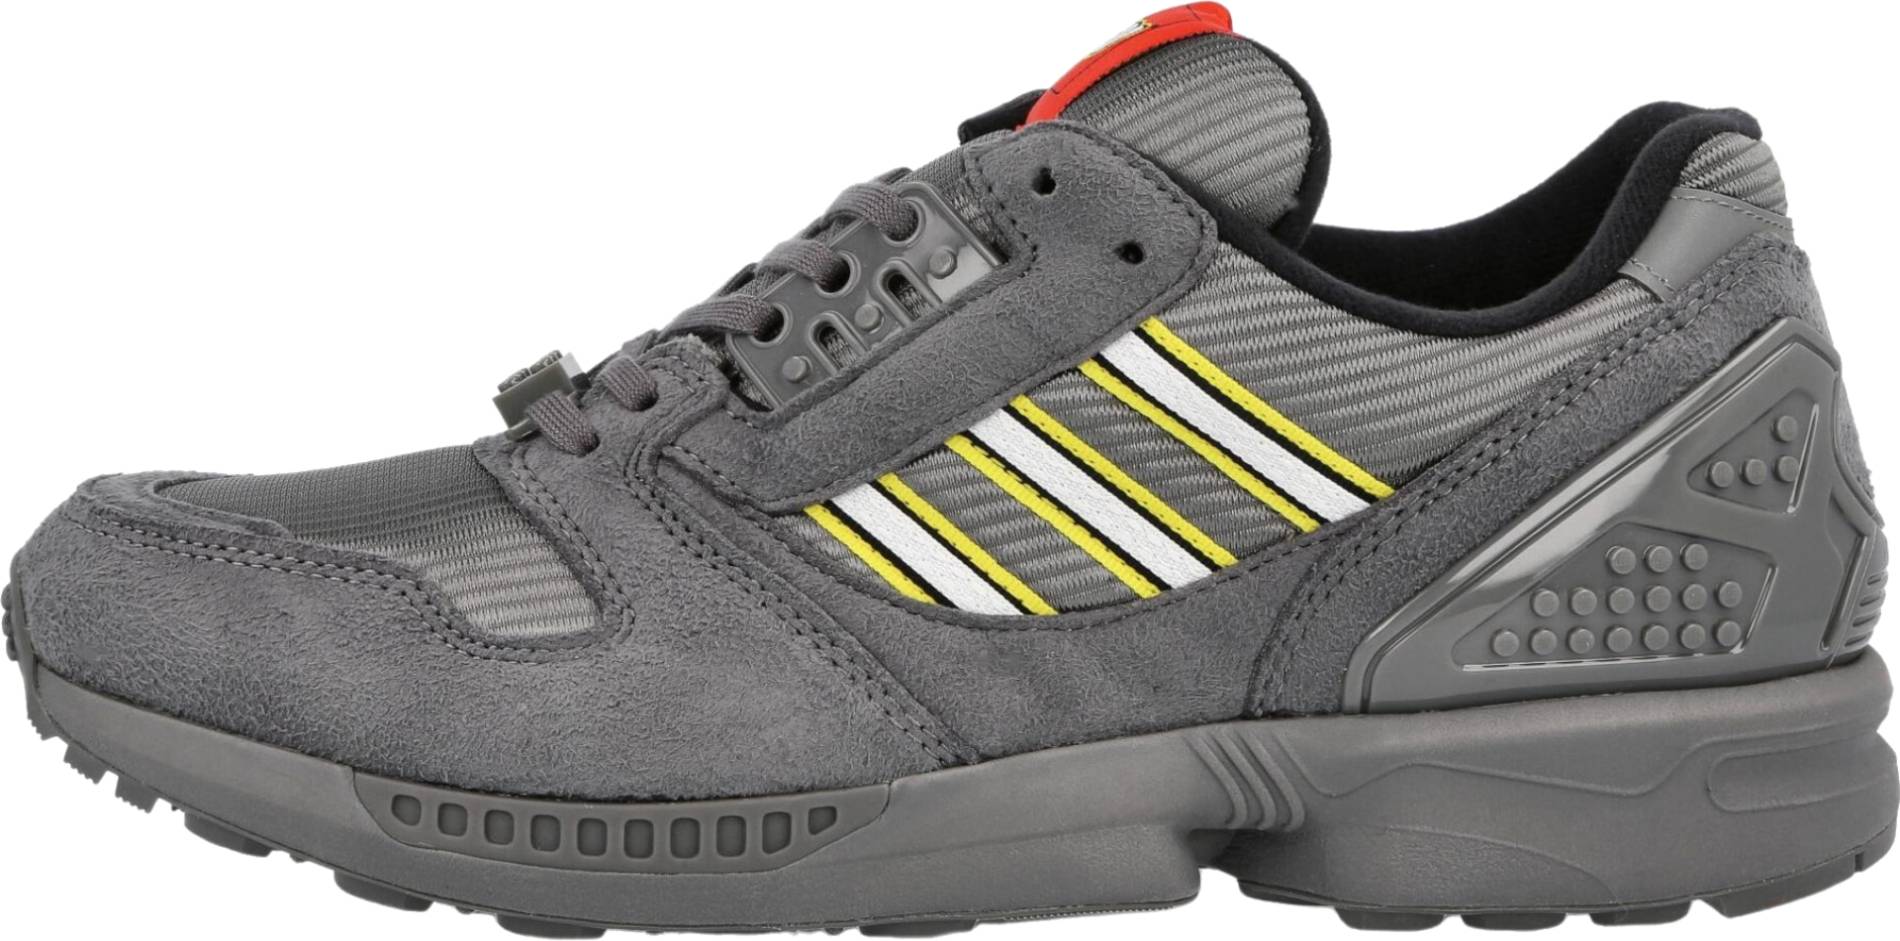 Adidas ZX 8000 LEGO sneakers in 5 colors (only $83) | RunRepeat